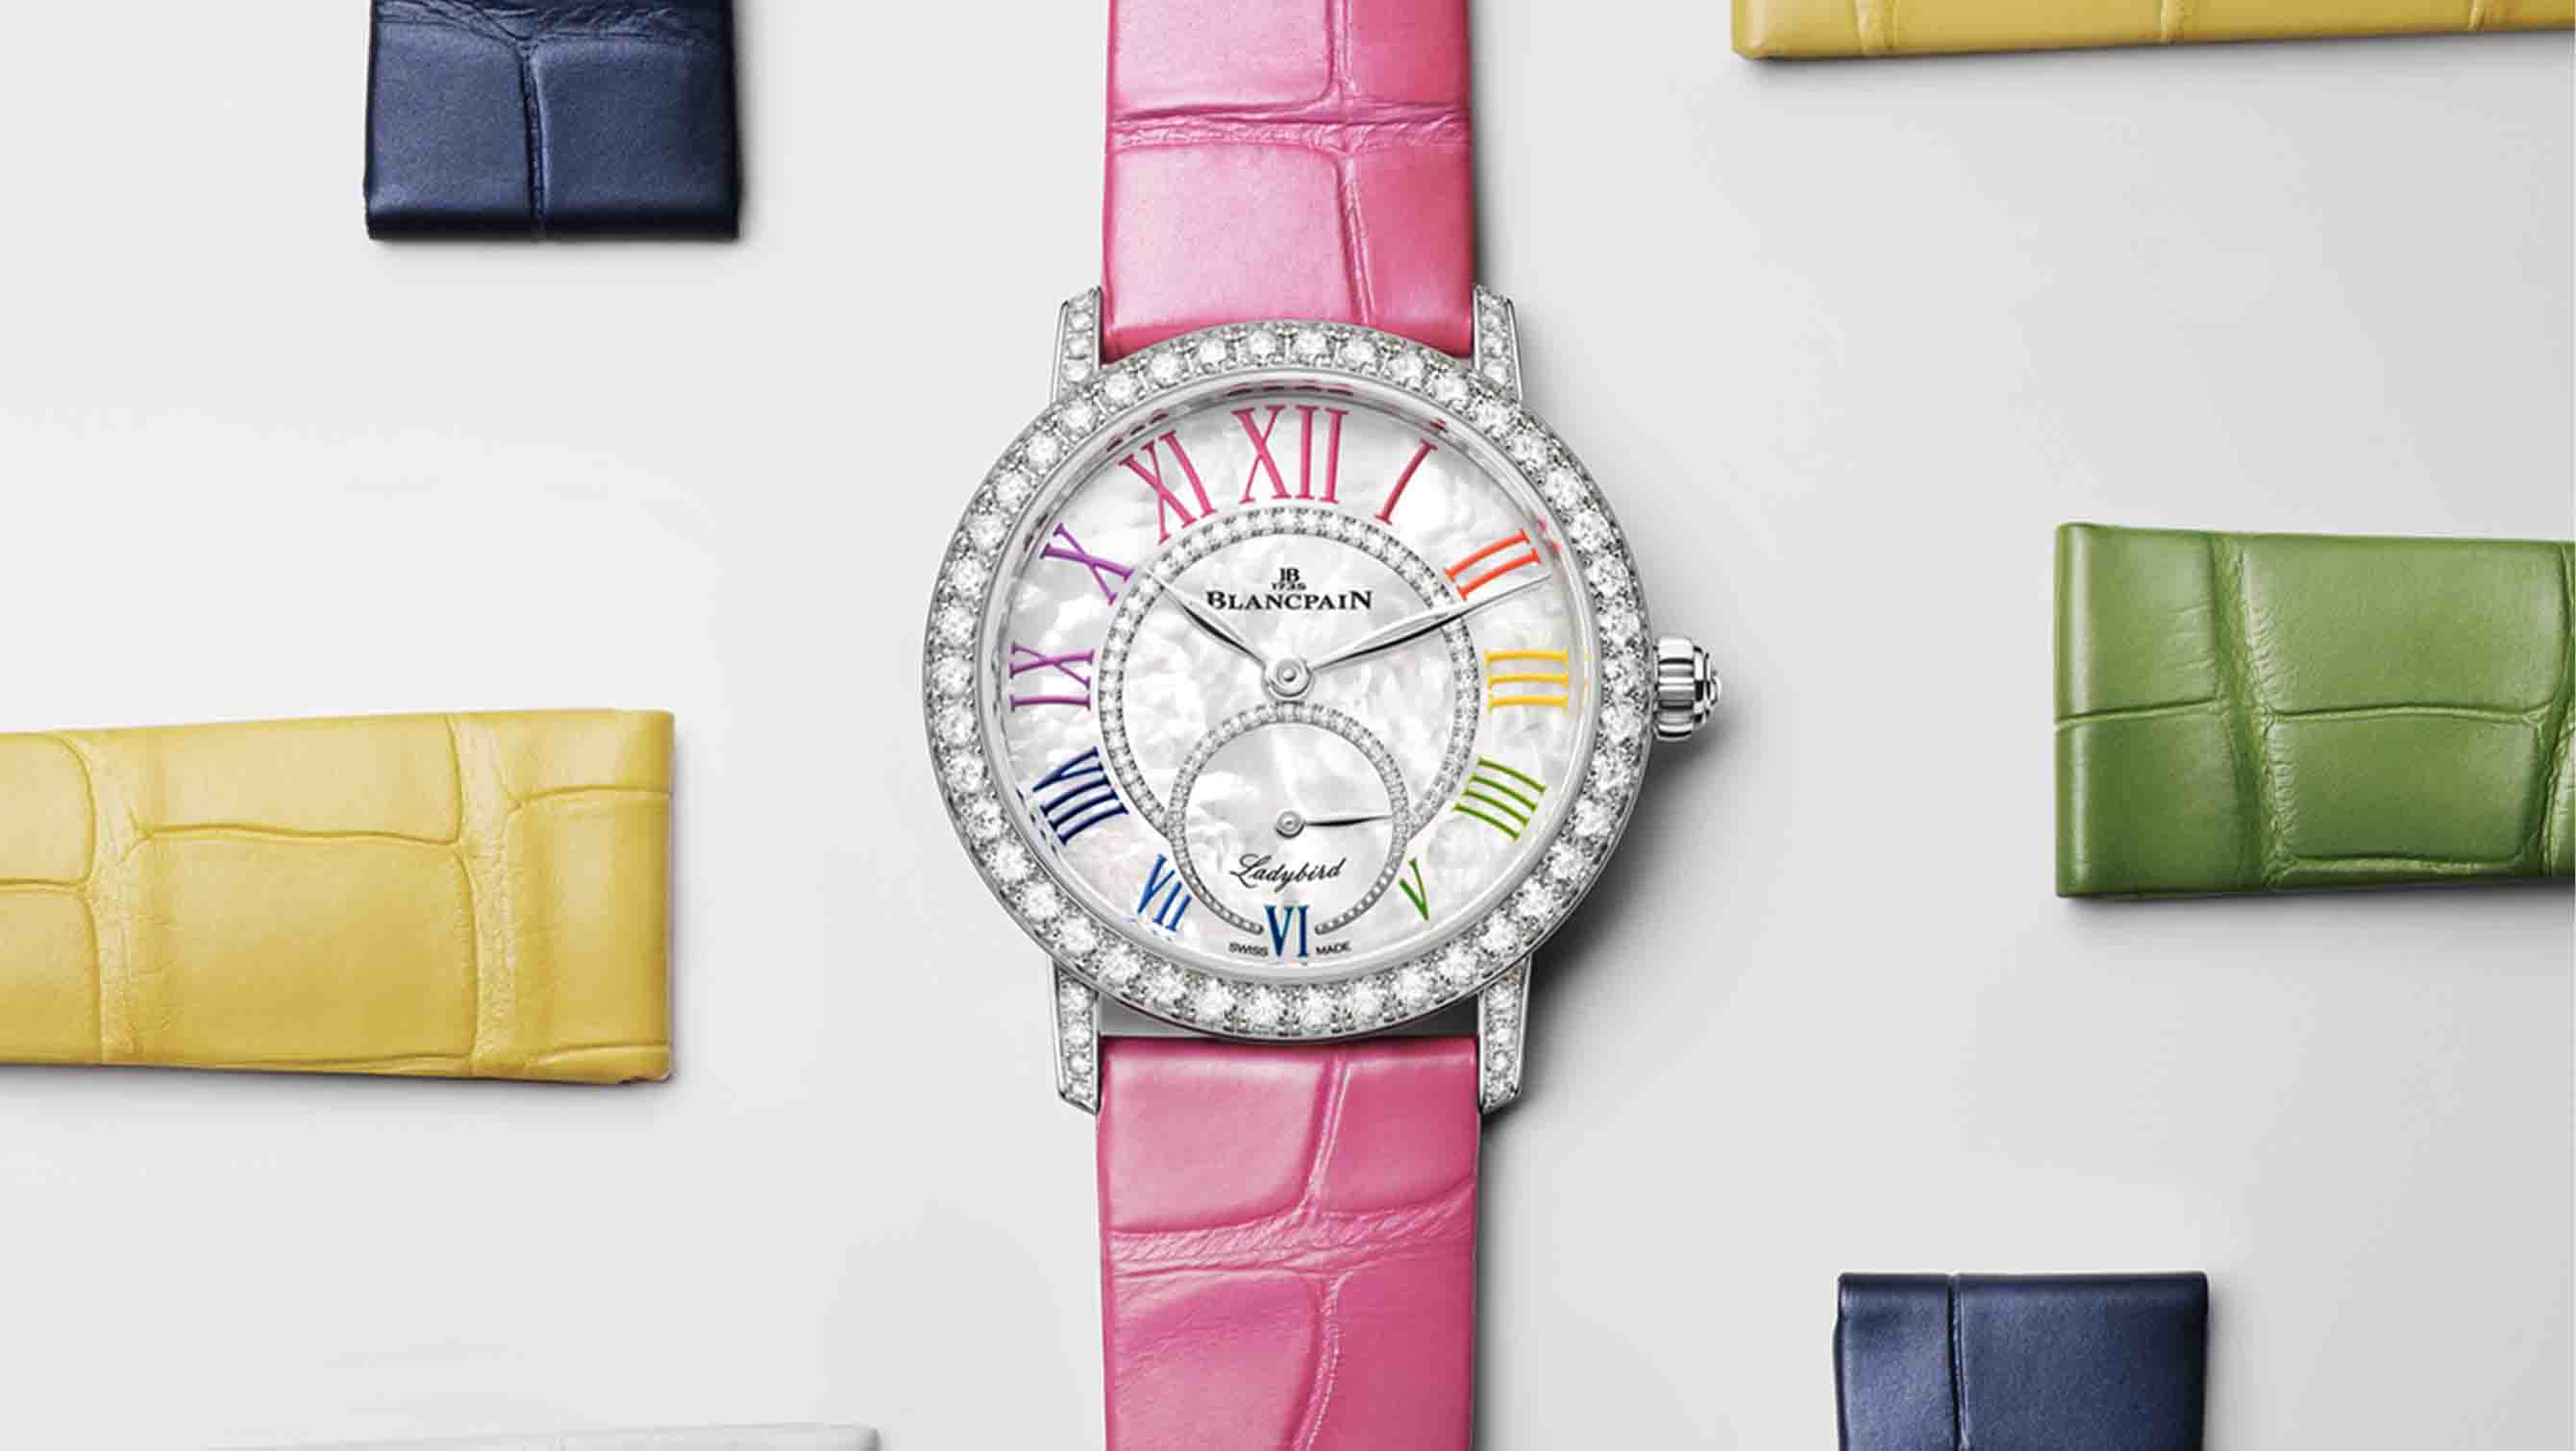 The new rainbow Blancpain Ladybird Colors offer a playful sense of glamour with a 100-hour power reserve